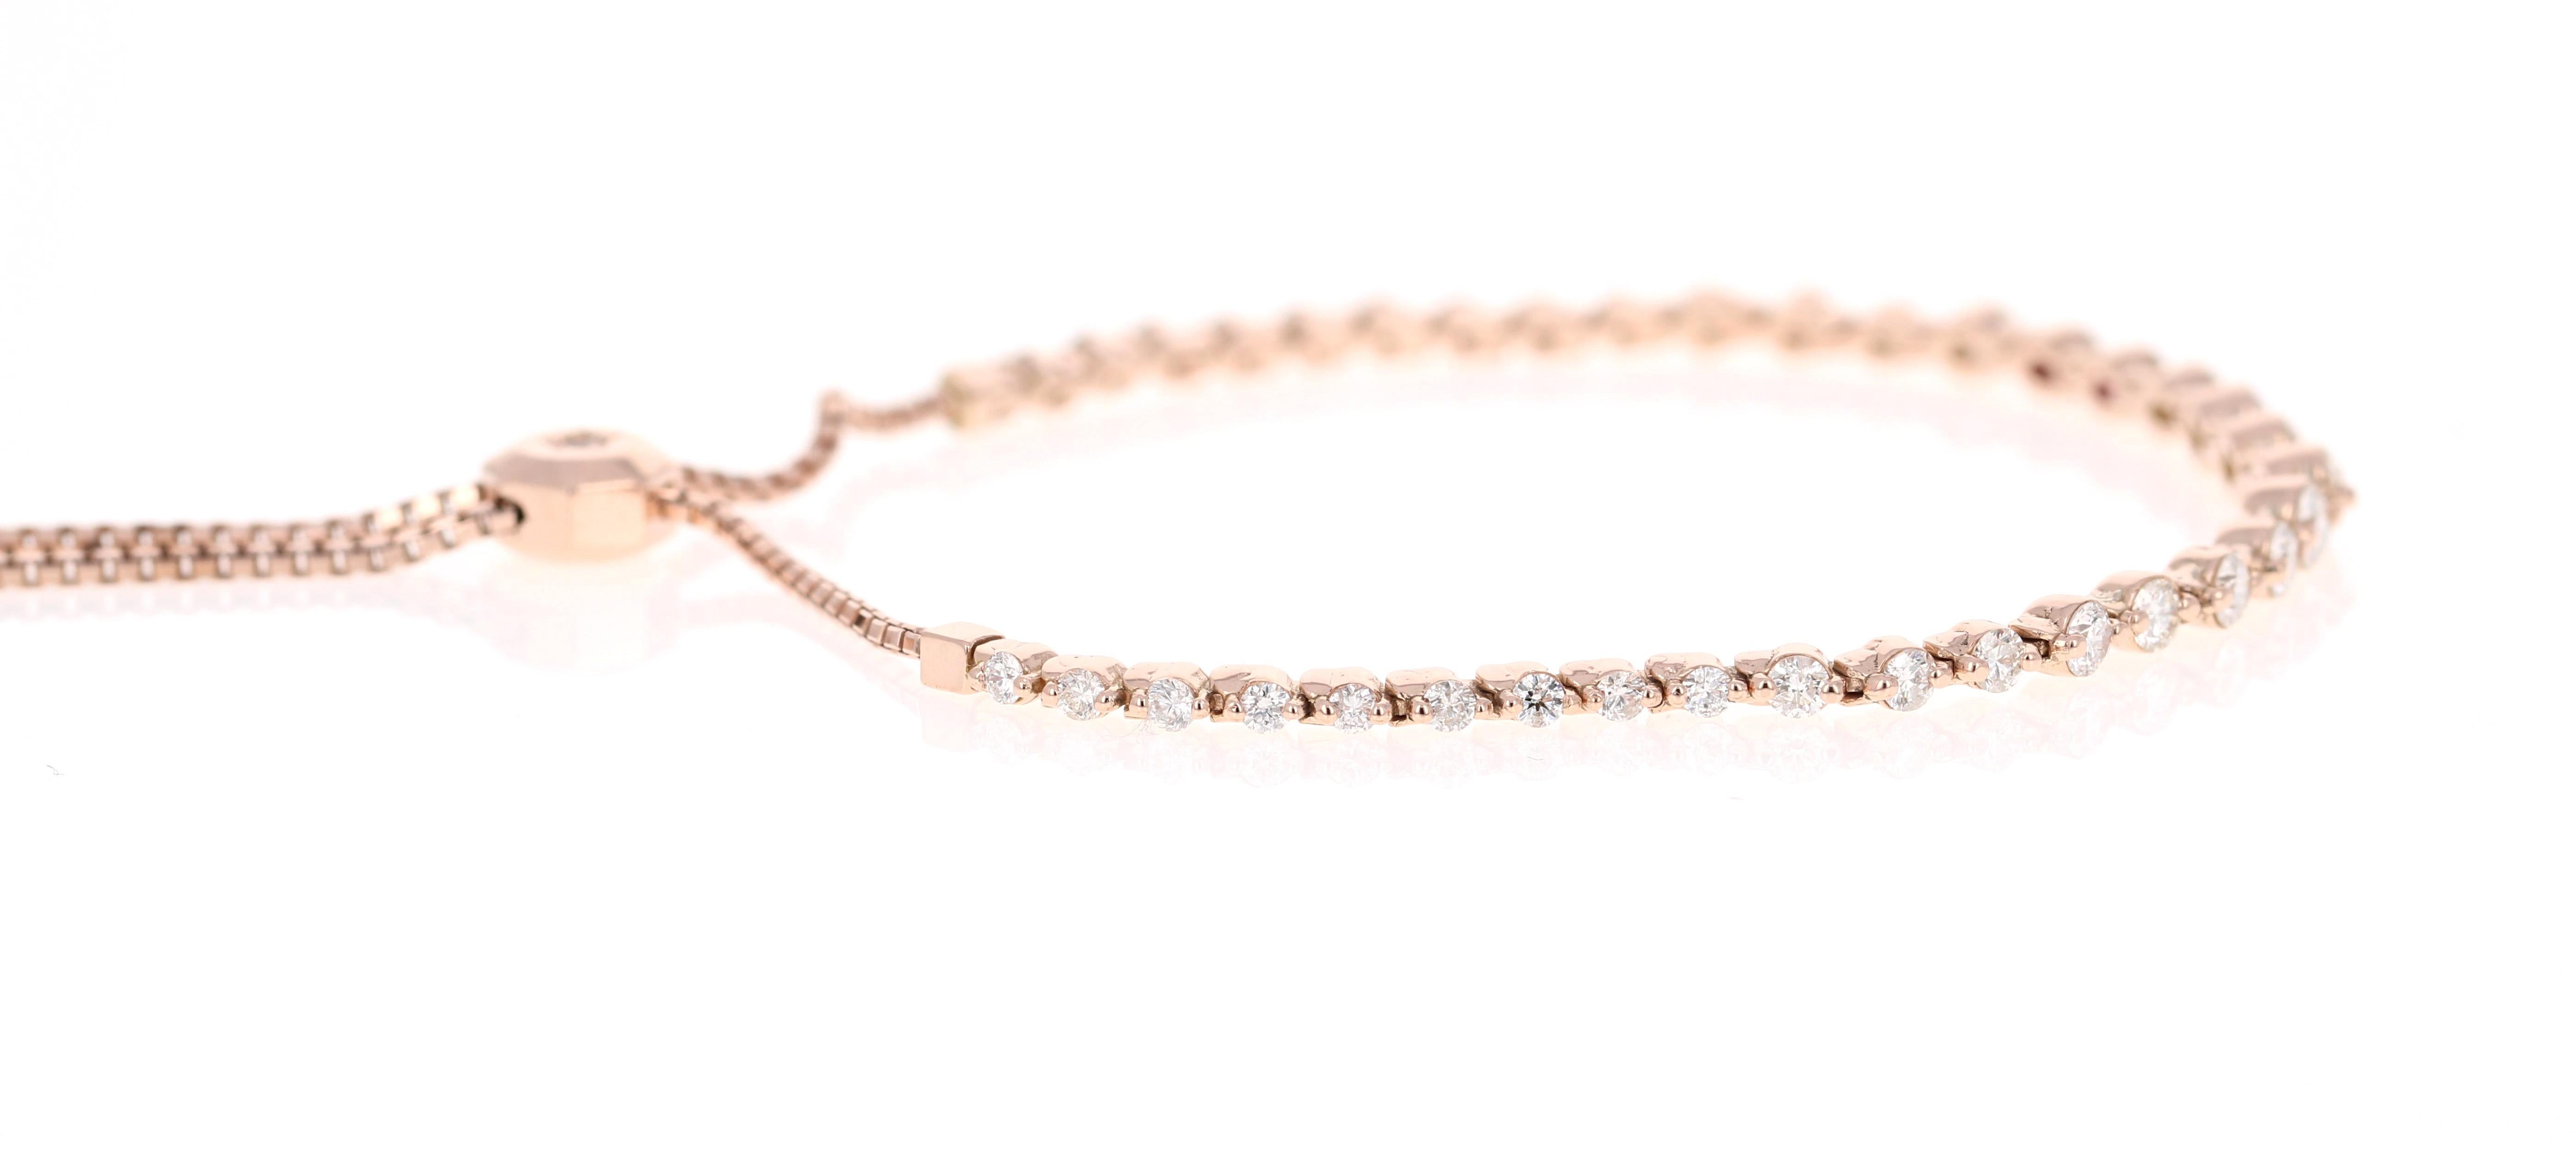 This bracelet has 38 Round Cut Diamonds that weigh 1.90 Carats. (Clarity: SI, Color: F) 

It is set in 14 Karat Rose Gold and weighs approximately 8.0 grams 

The bracelet is flexible in length which means you can make it fit your wrist with an